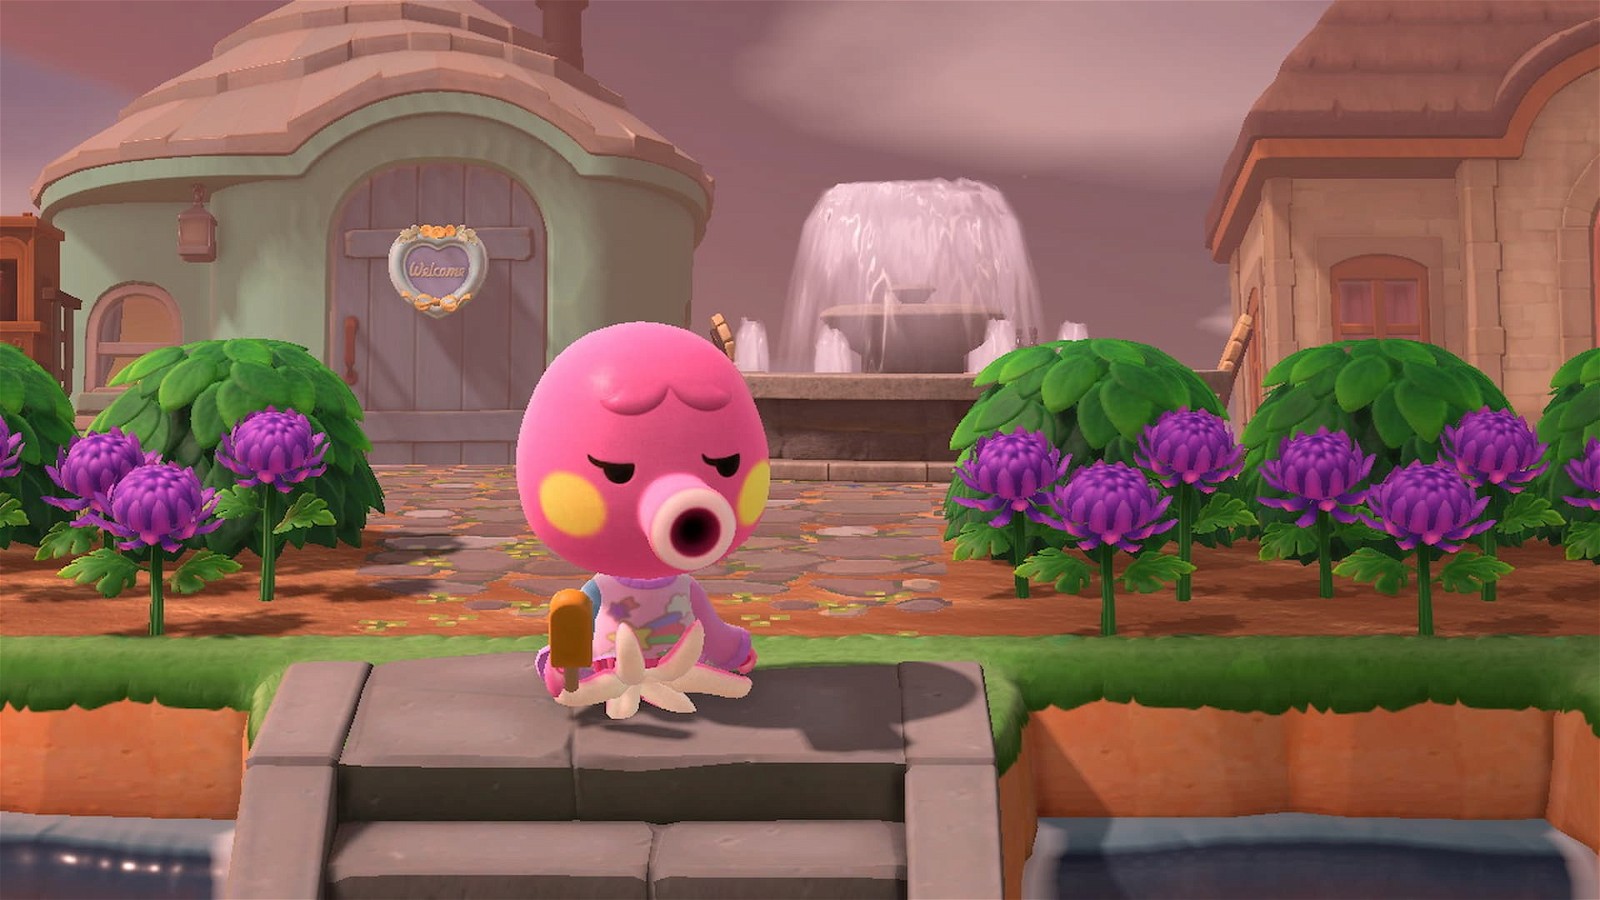 The player encountered the bug when they launched Animal Crossing New Horizons.